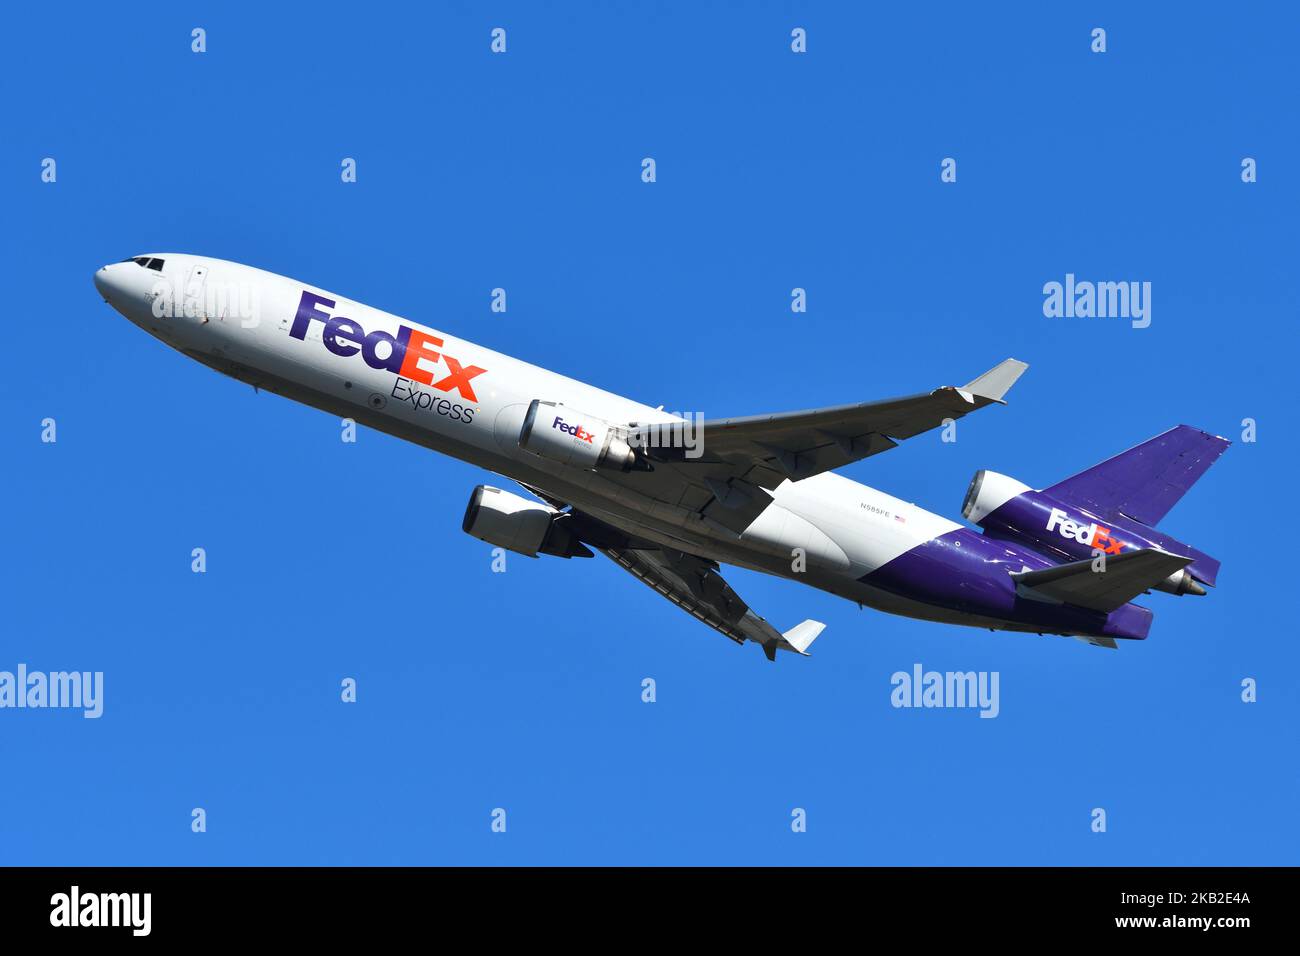 Chiba prefecture, Japan - October 29, 2021: FedEx McDonnell Douglas MD-11F (N585FE) freighter take off at Narita International Airport. Stock Photo